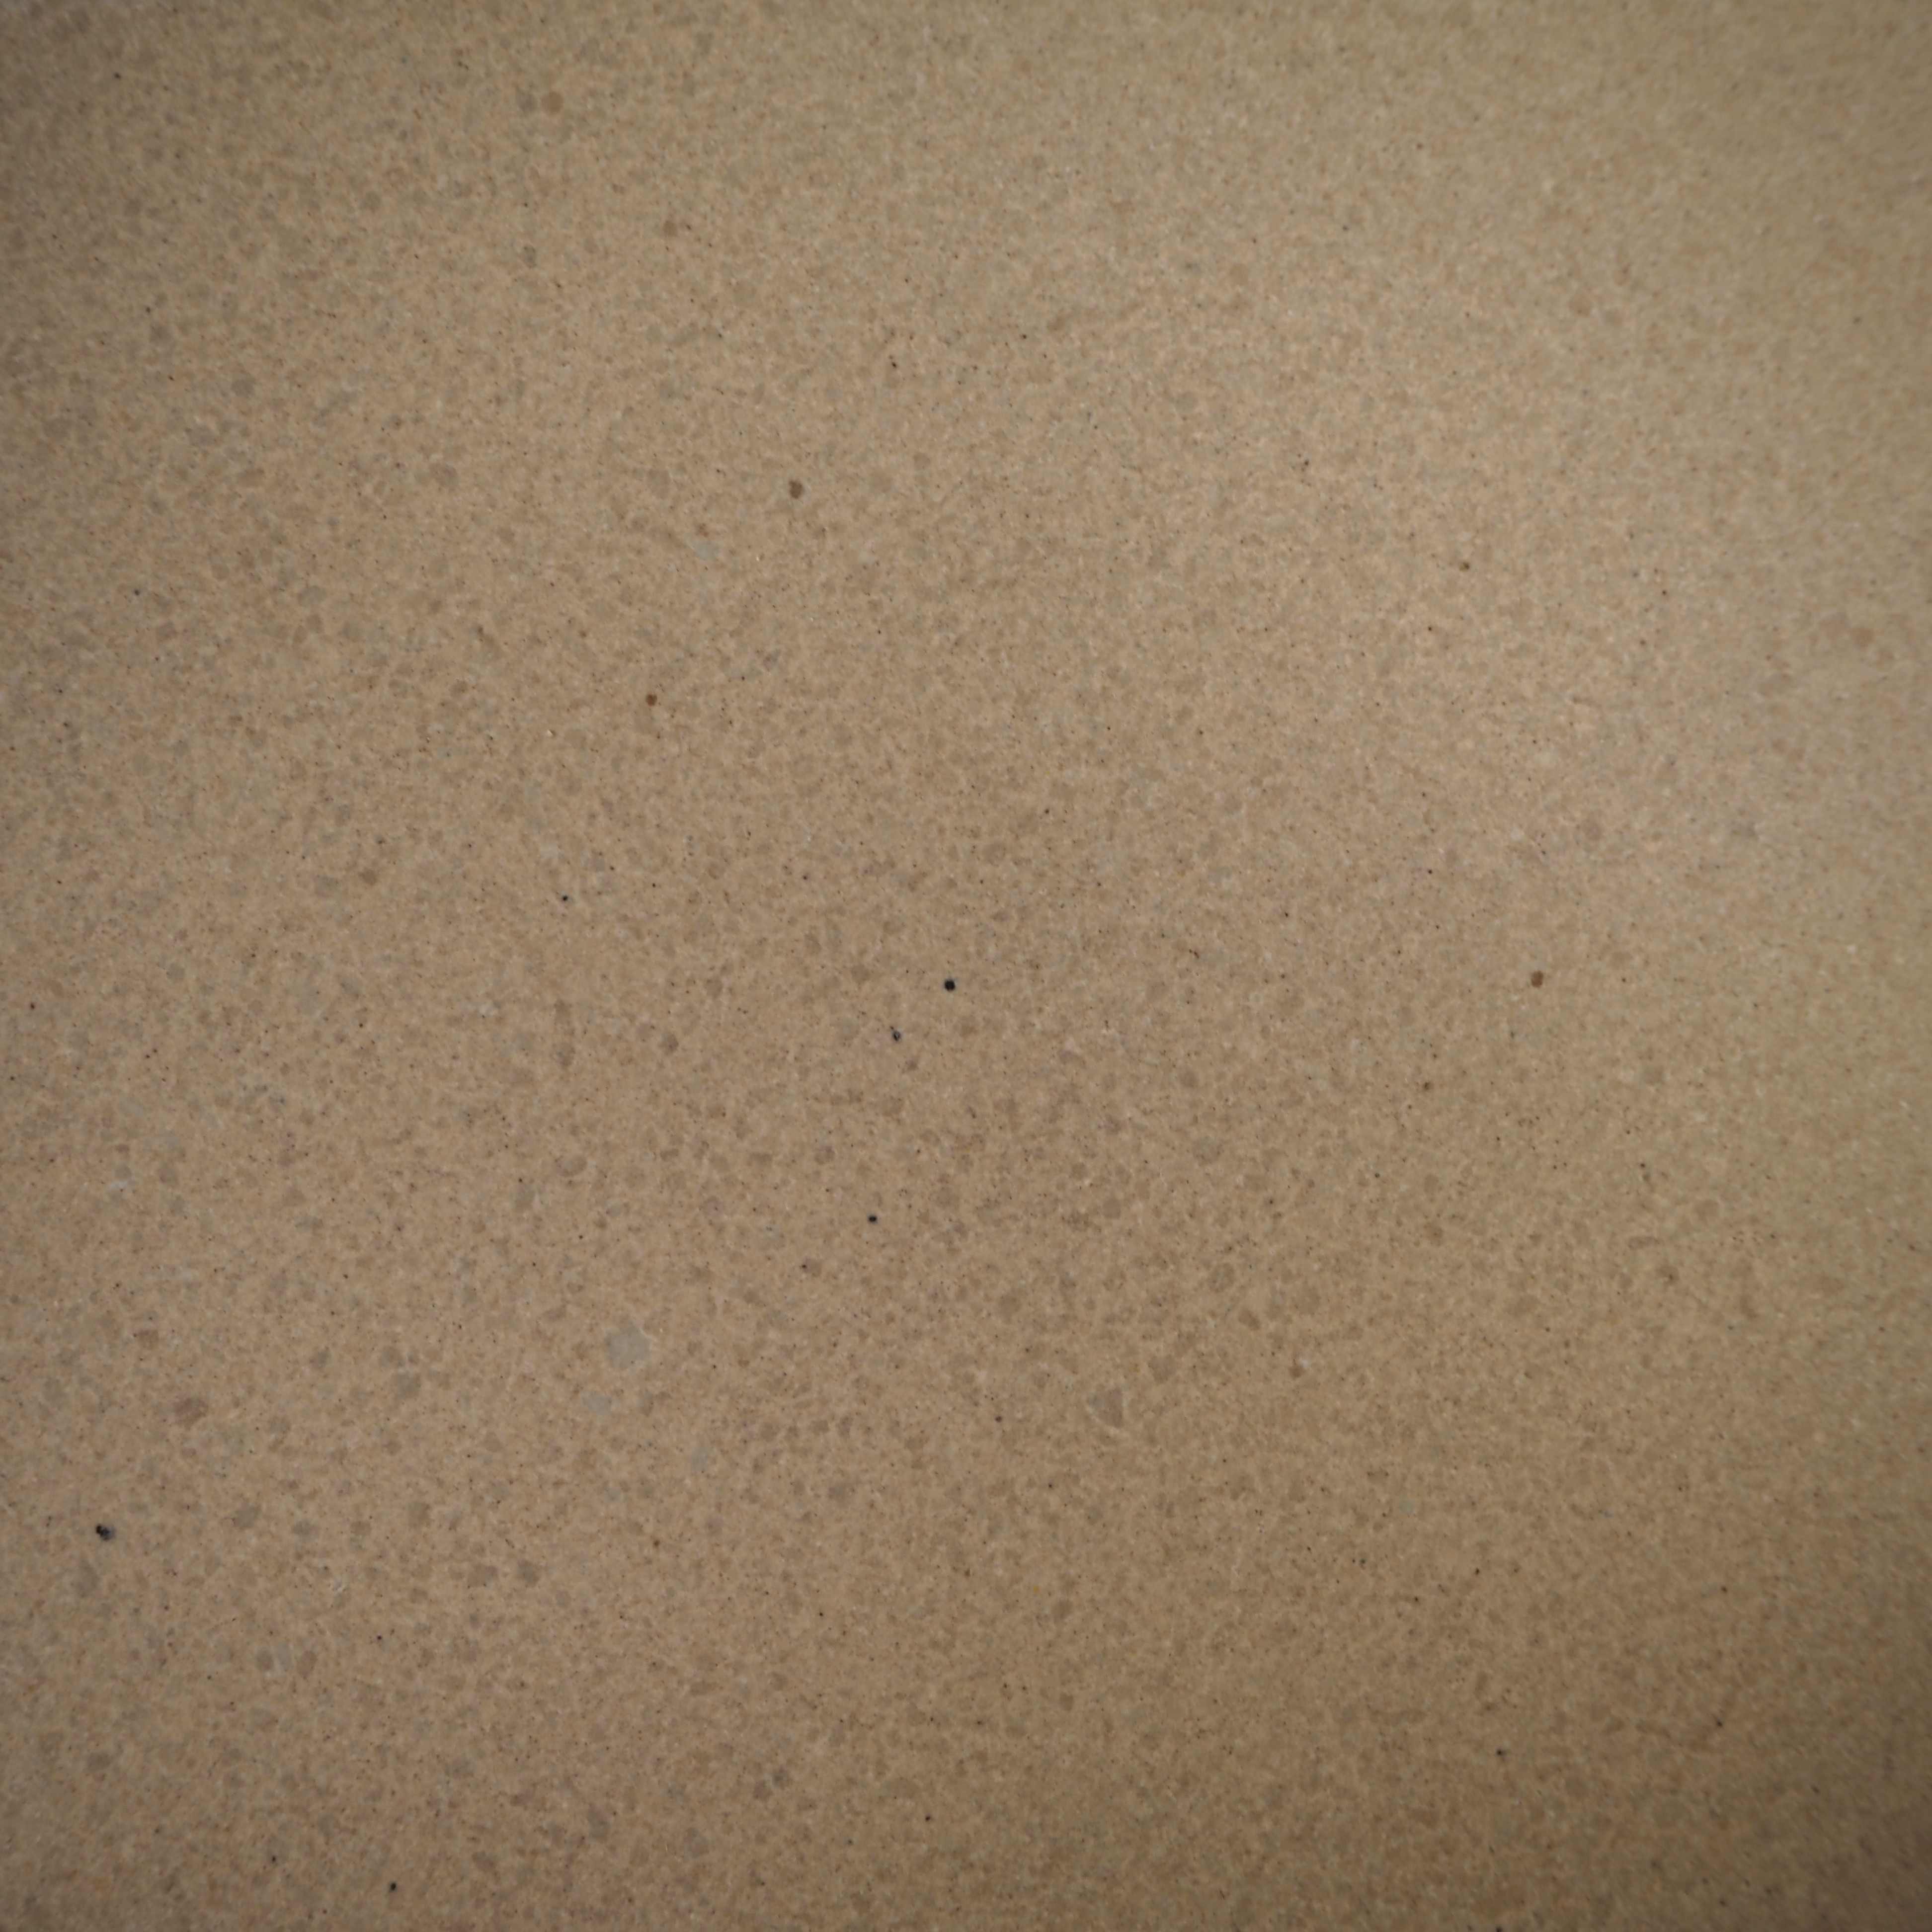 Speckled beige ceramic tiles by Royal Mosa (9,65 x 9,65 cm)